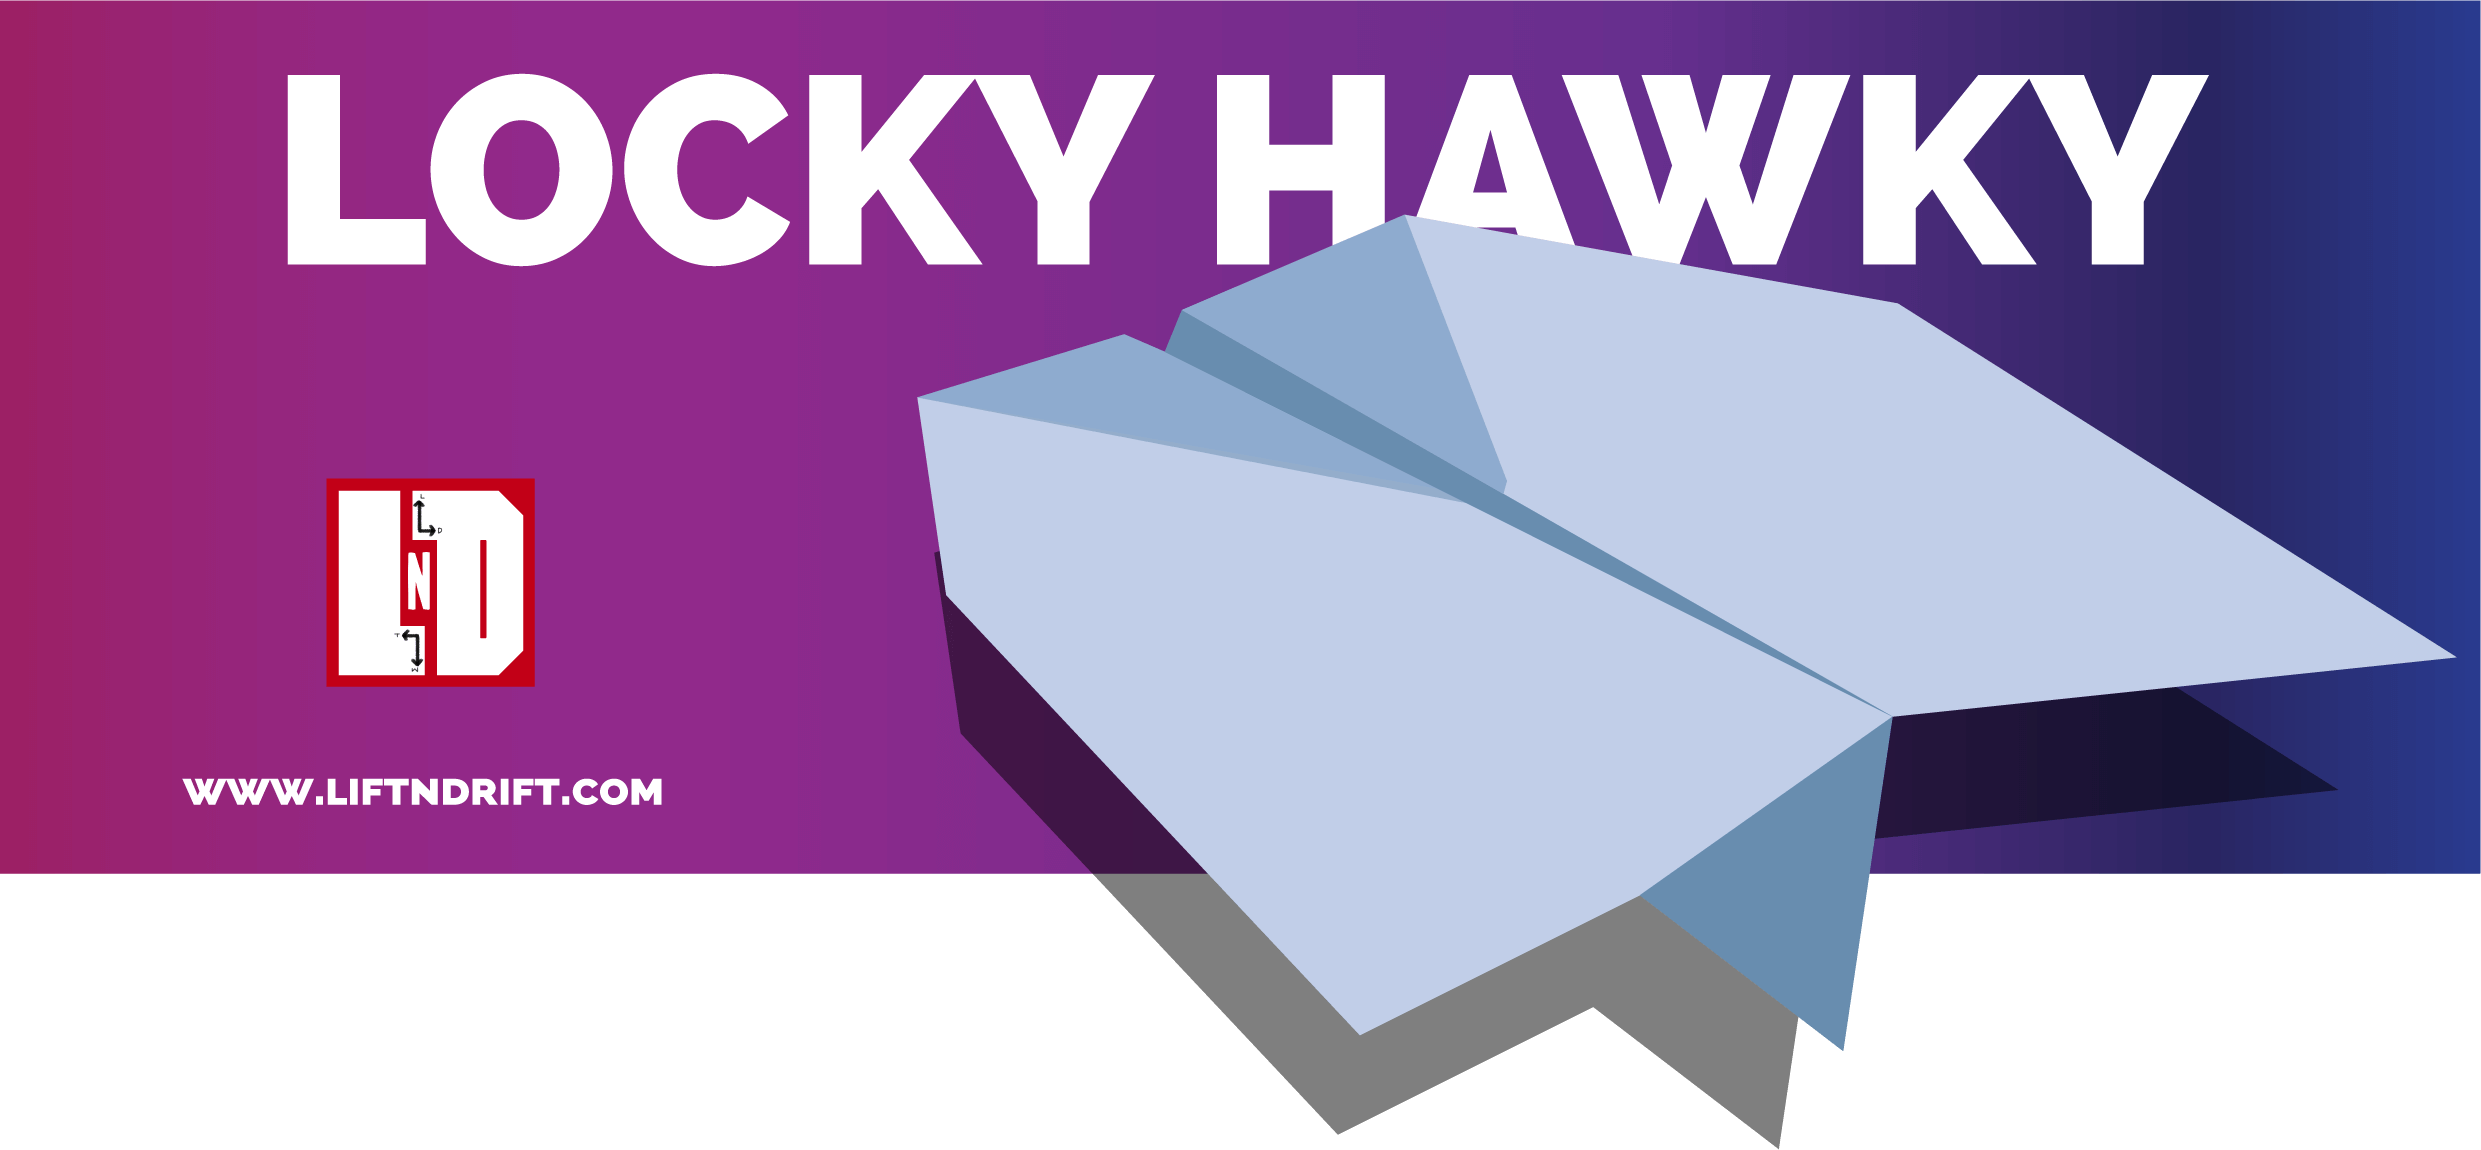 Locky hawky paper airplane